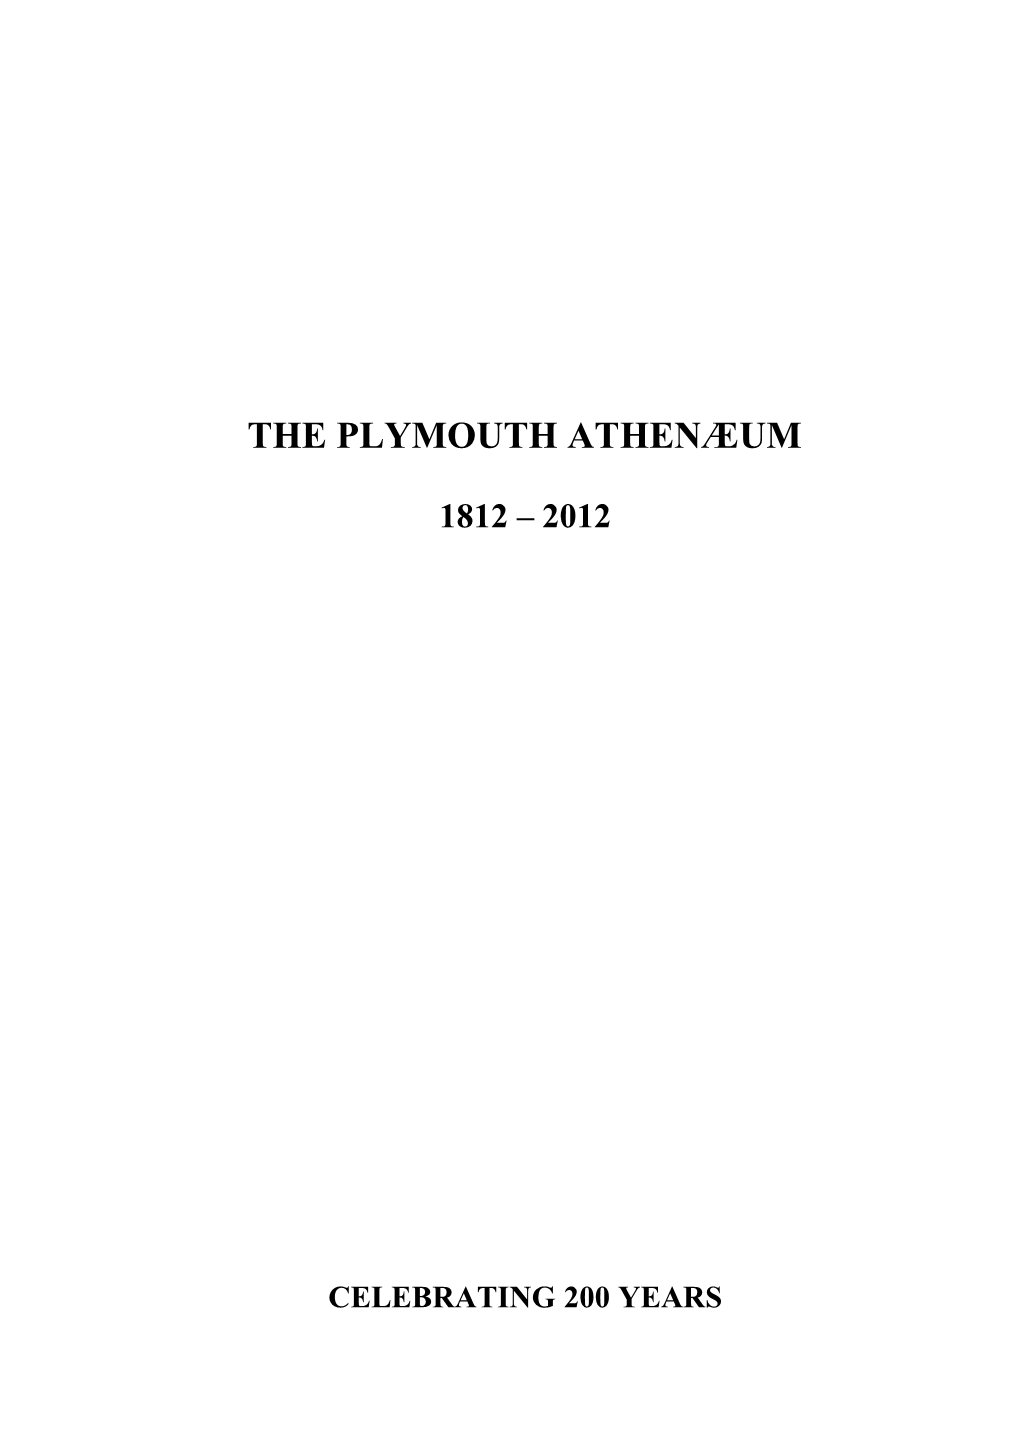 The Plymouth Athenæum